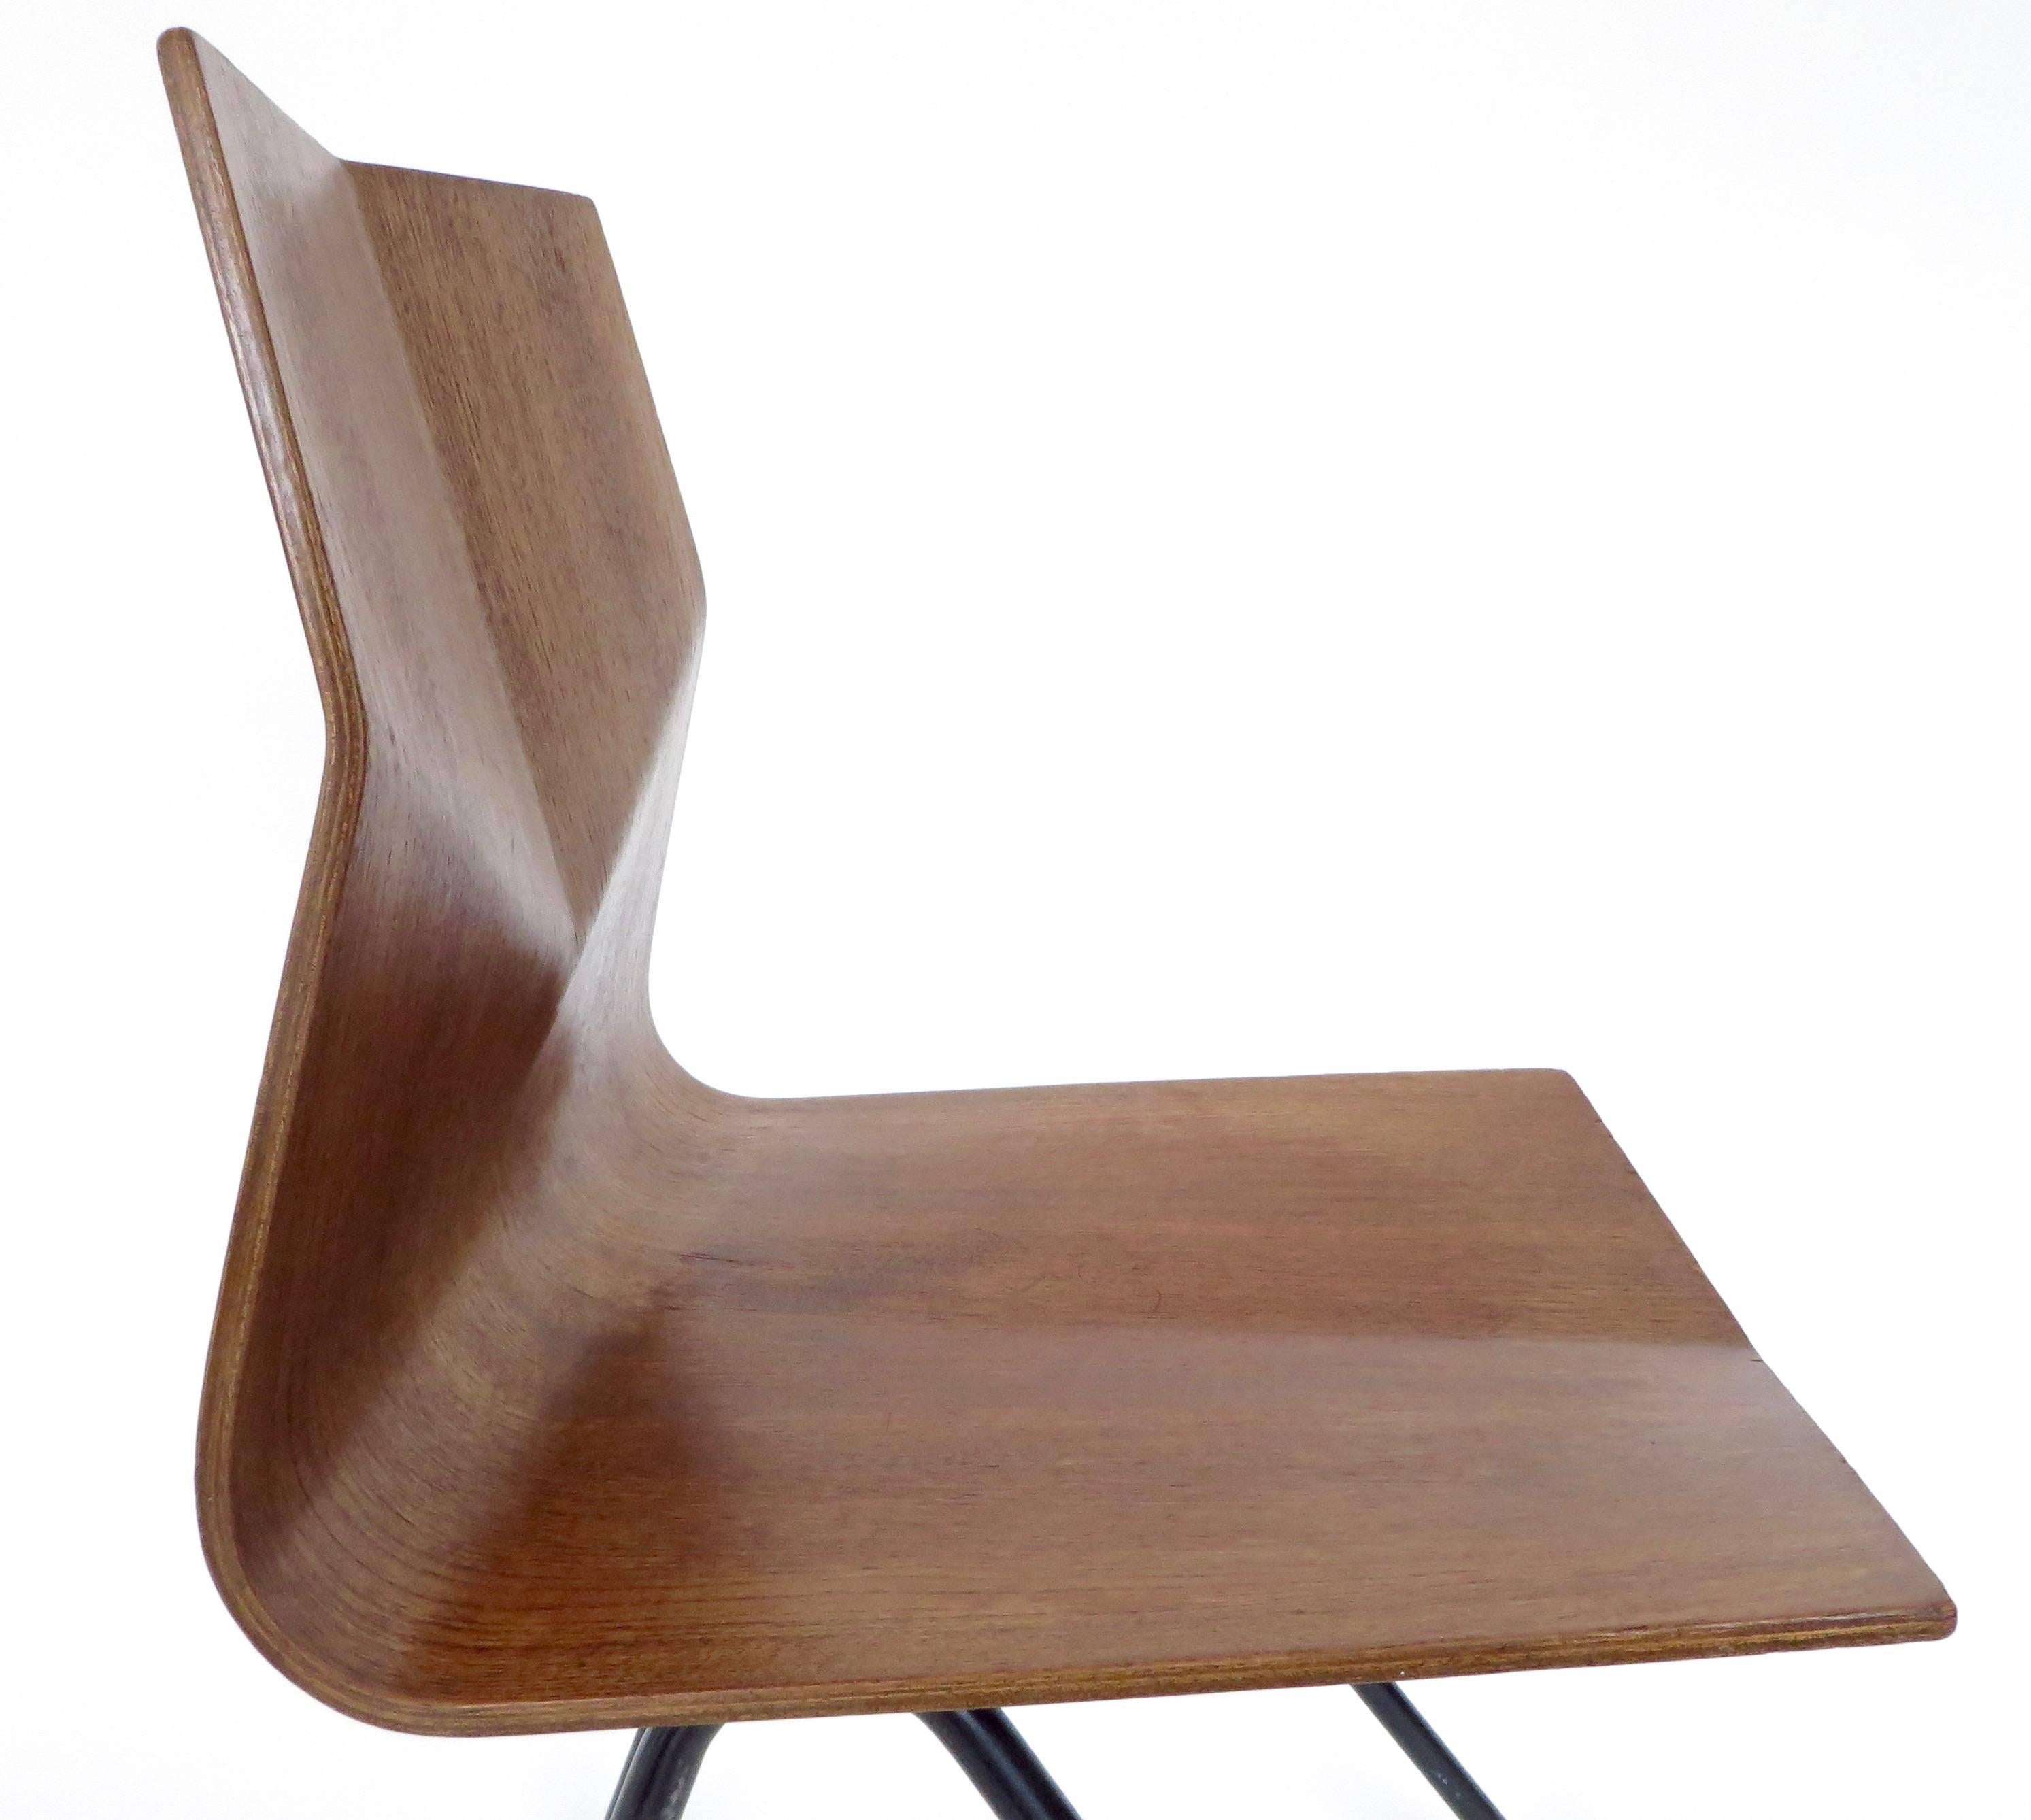 Rene-Jean Caillette French Diamond Chair Molded Plywood 1